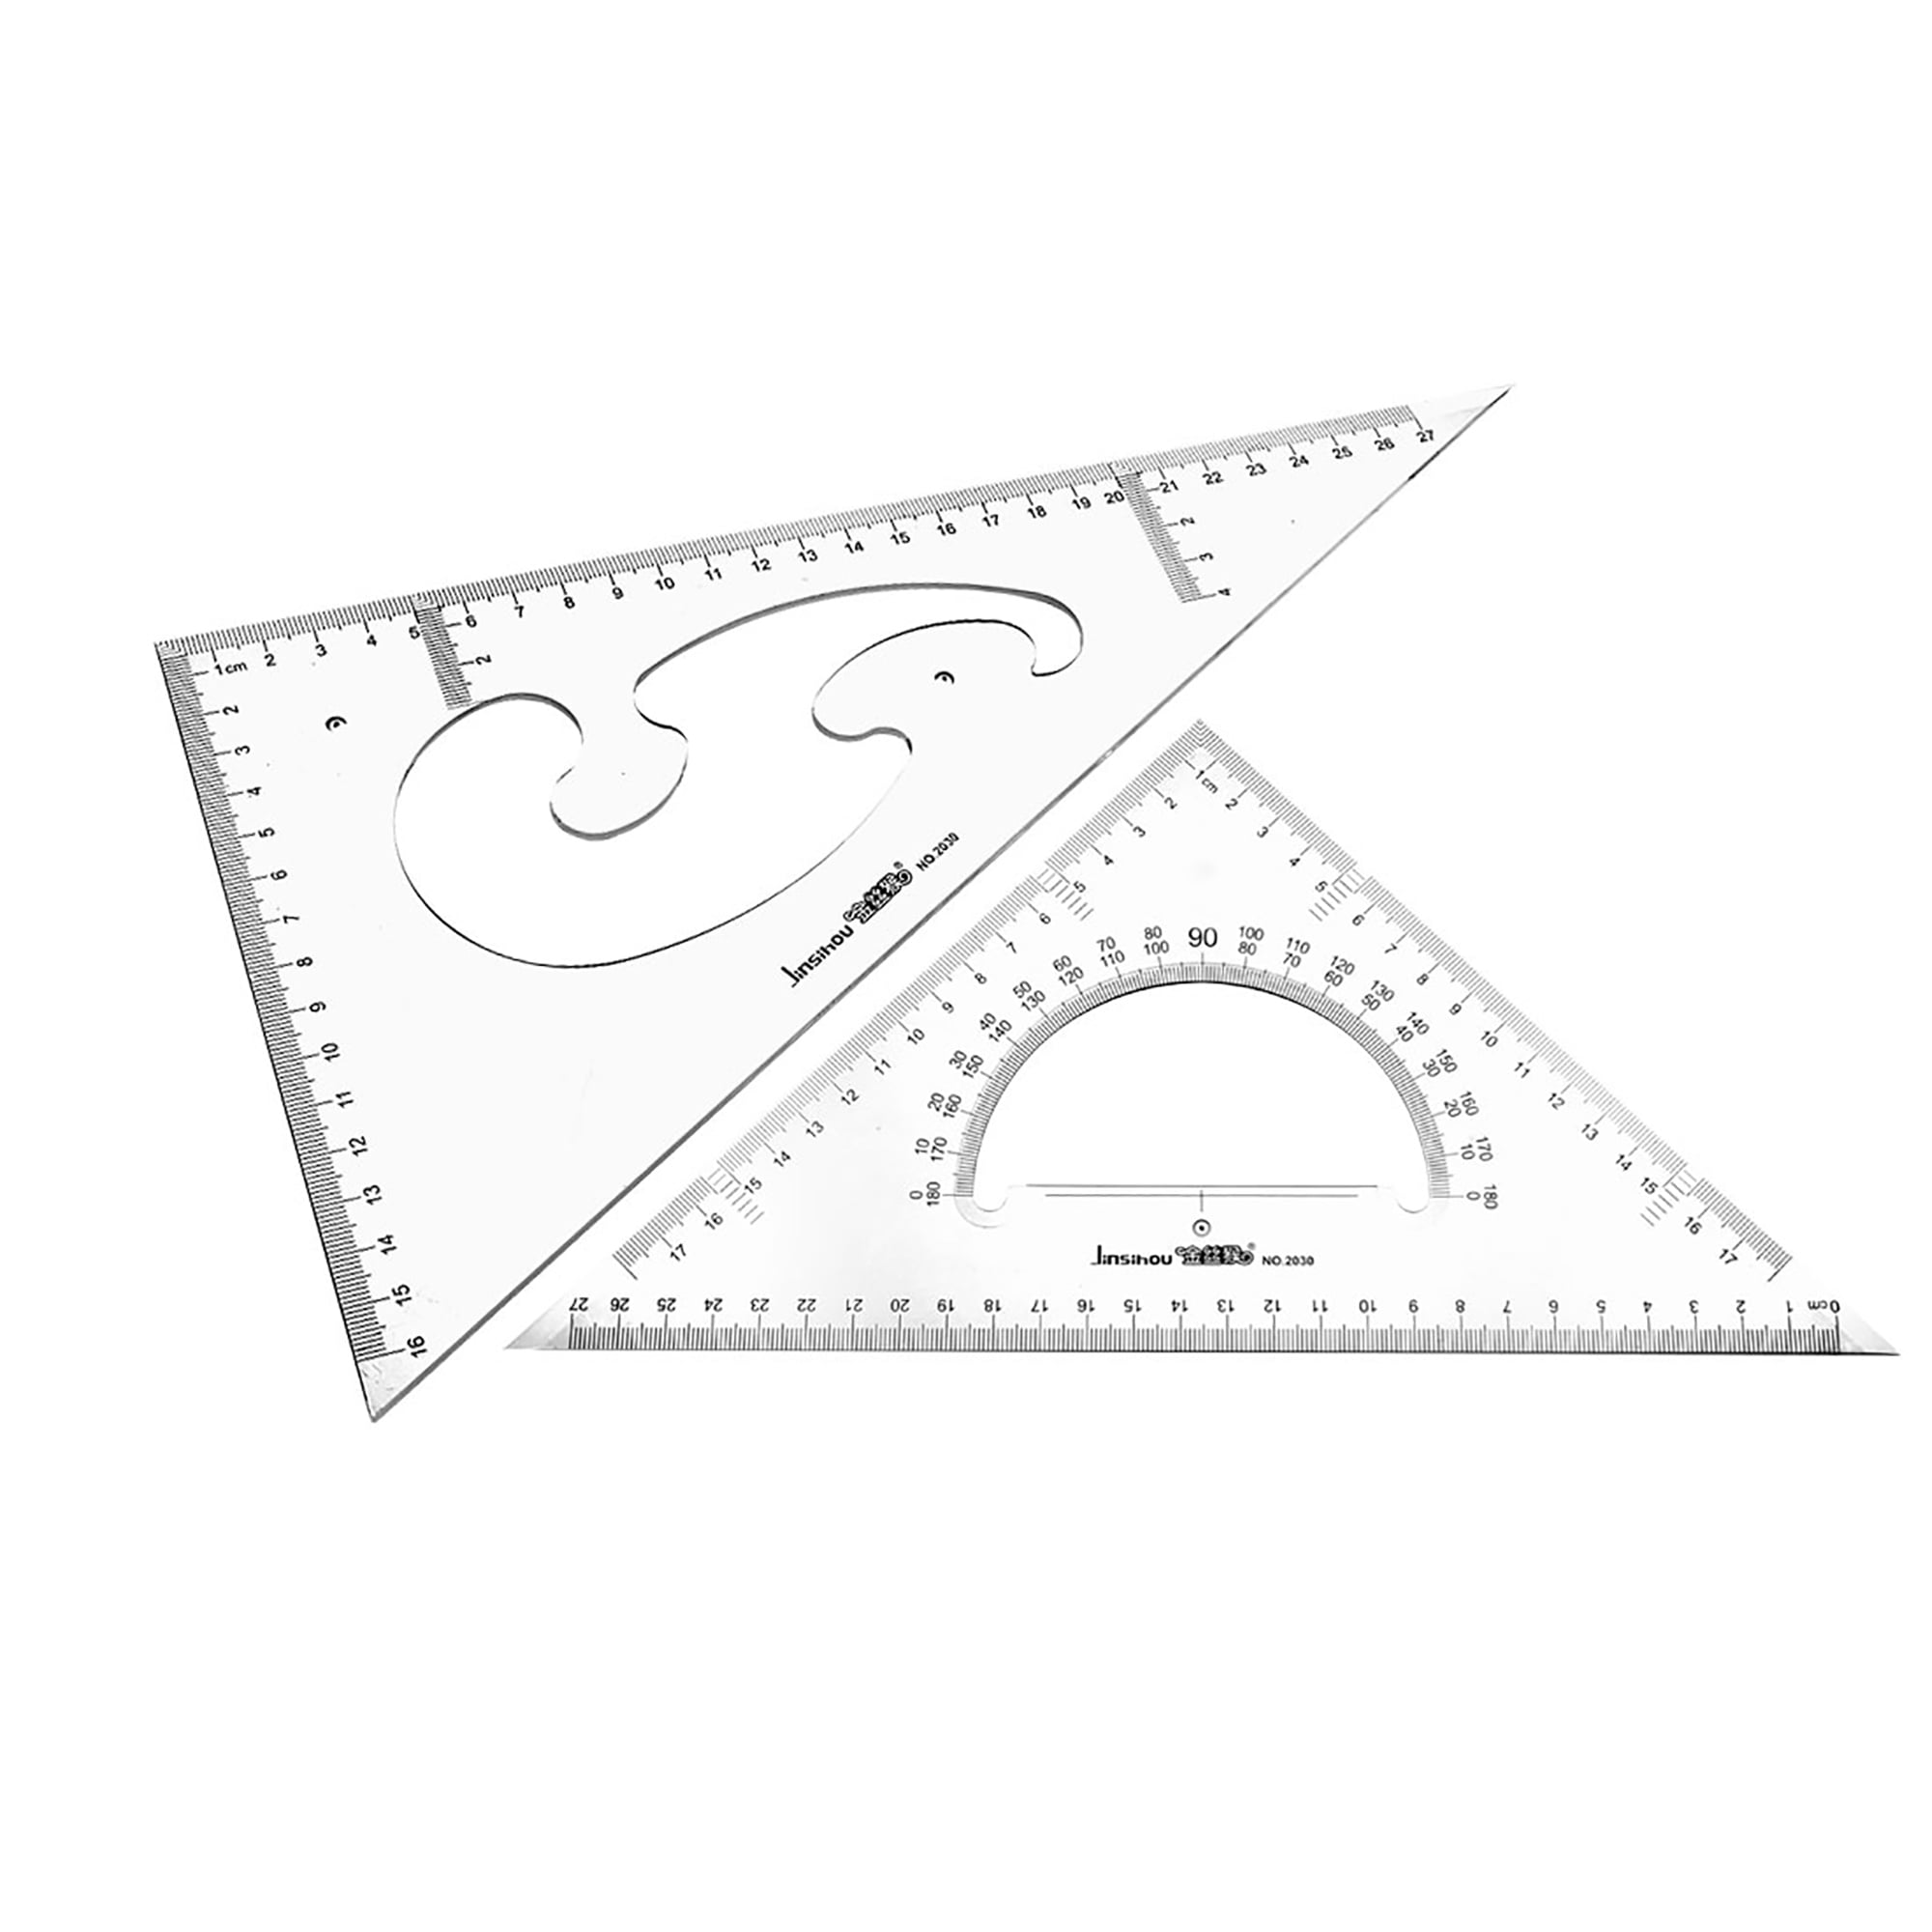 Quilt in A Day Ruler 60 Degree 8.5 